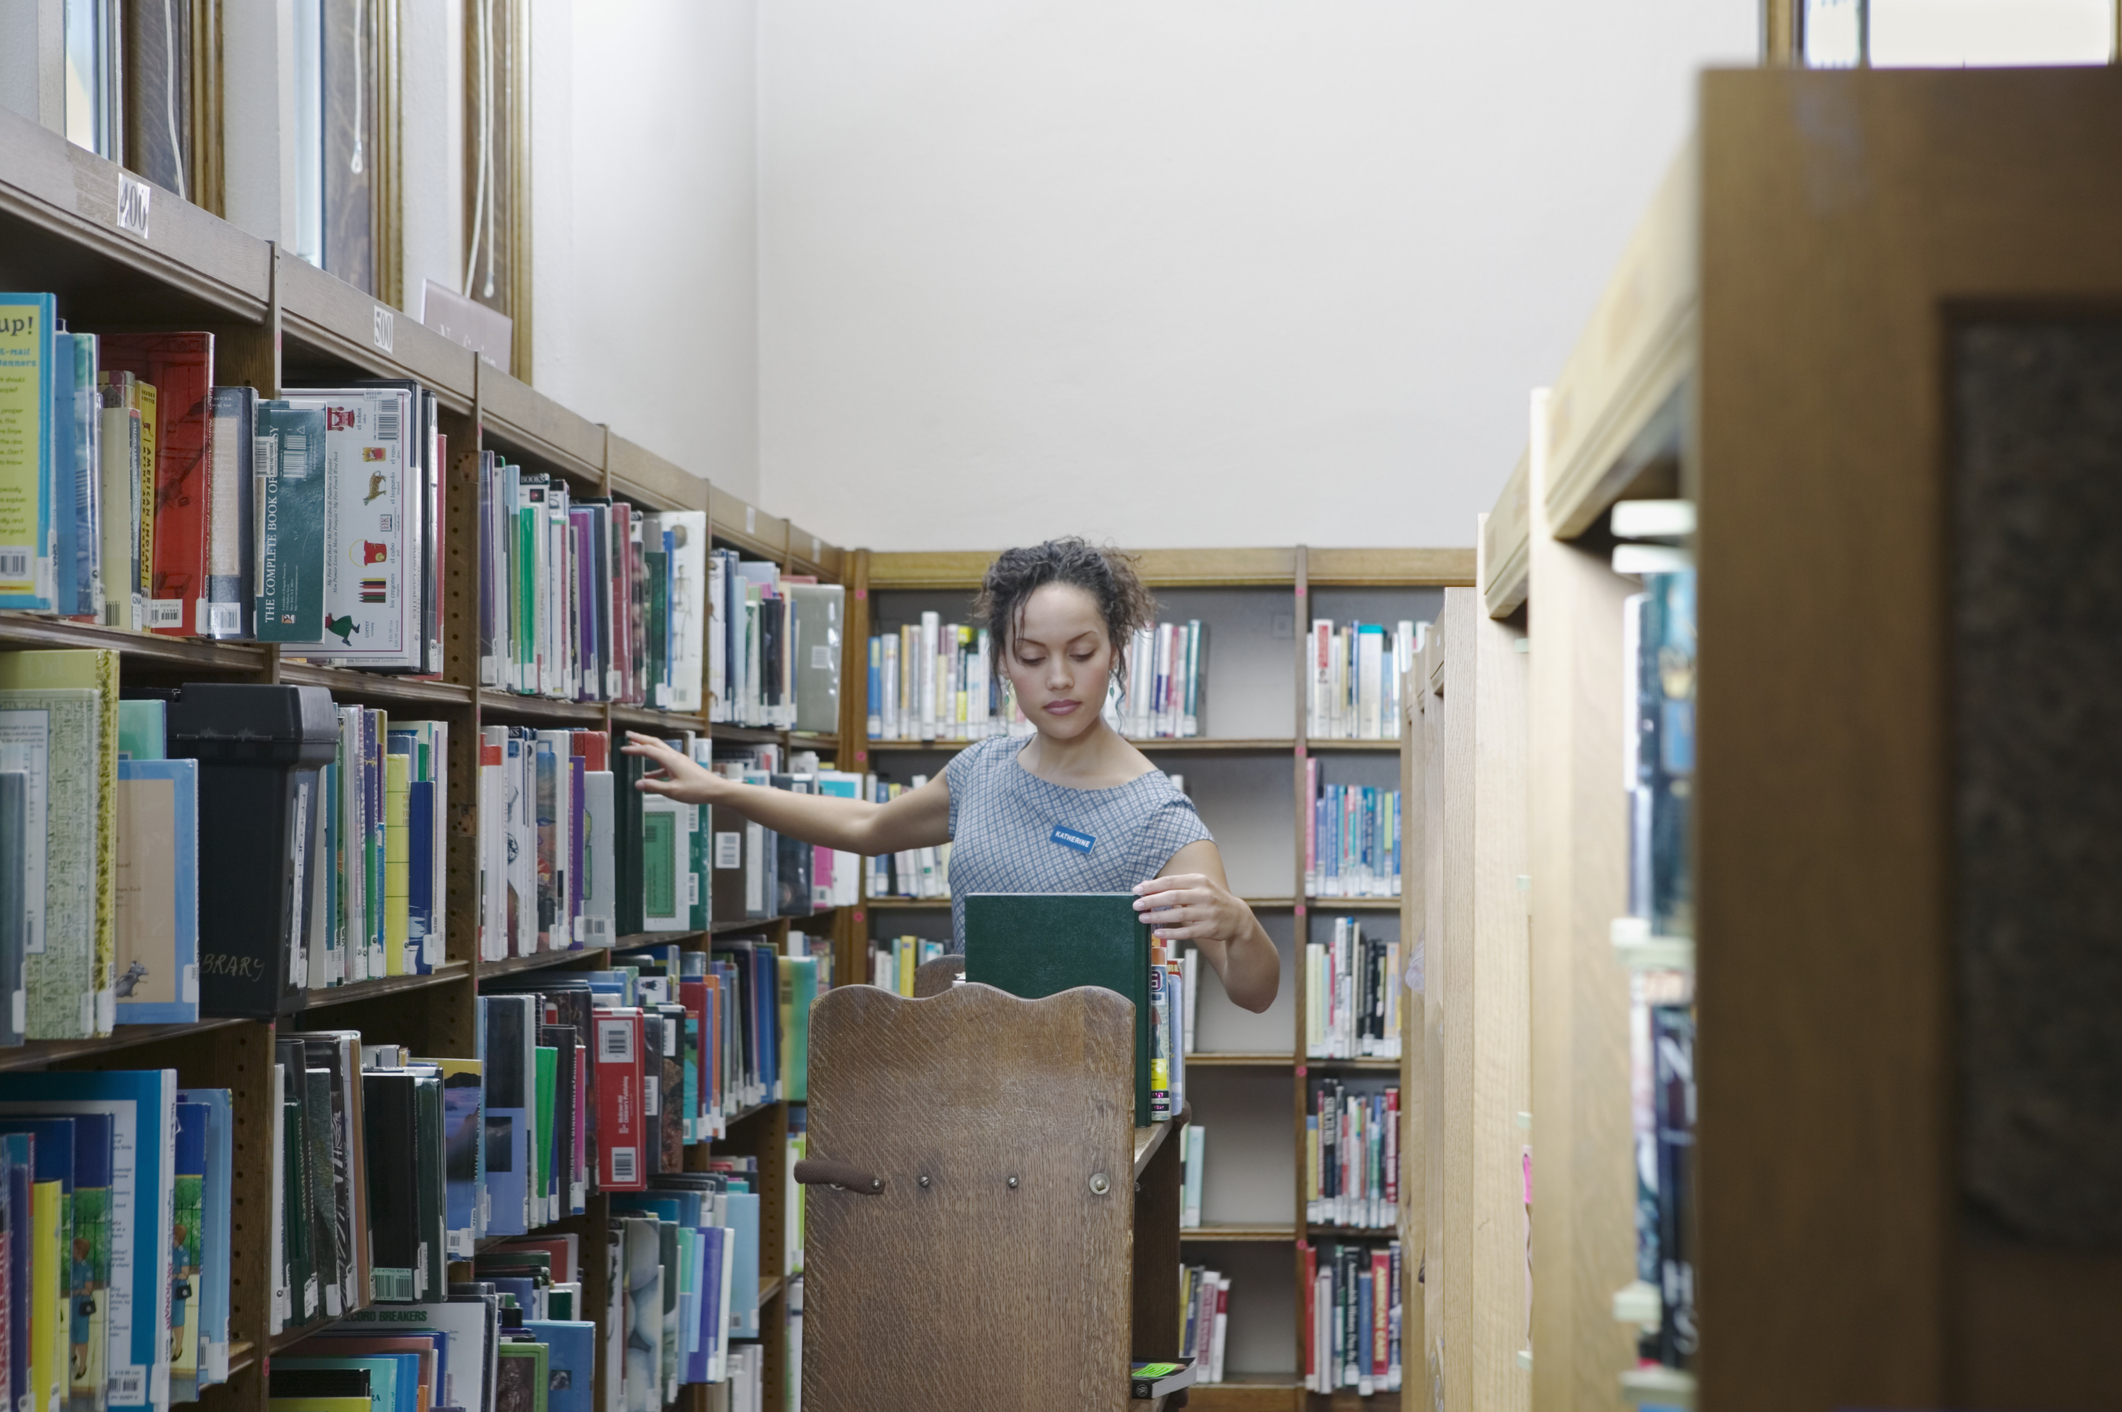 A person browsing books on library shelves, selecting one to examine